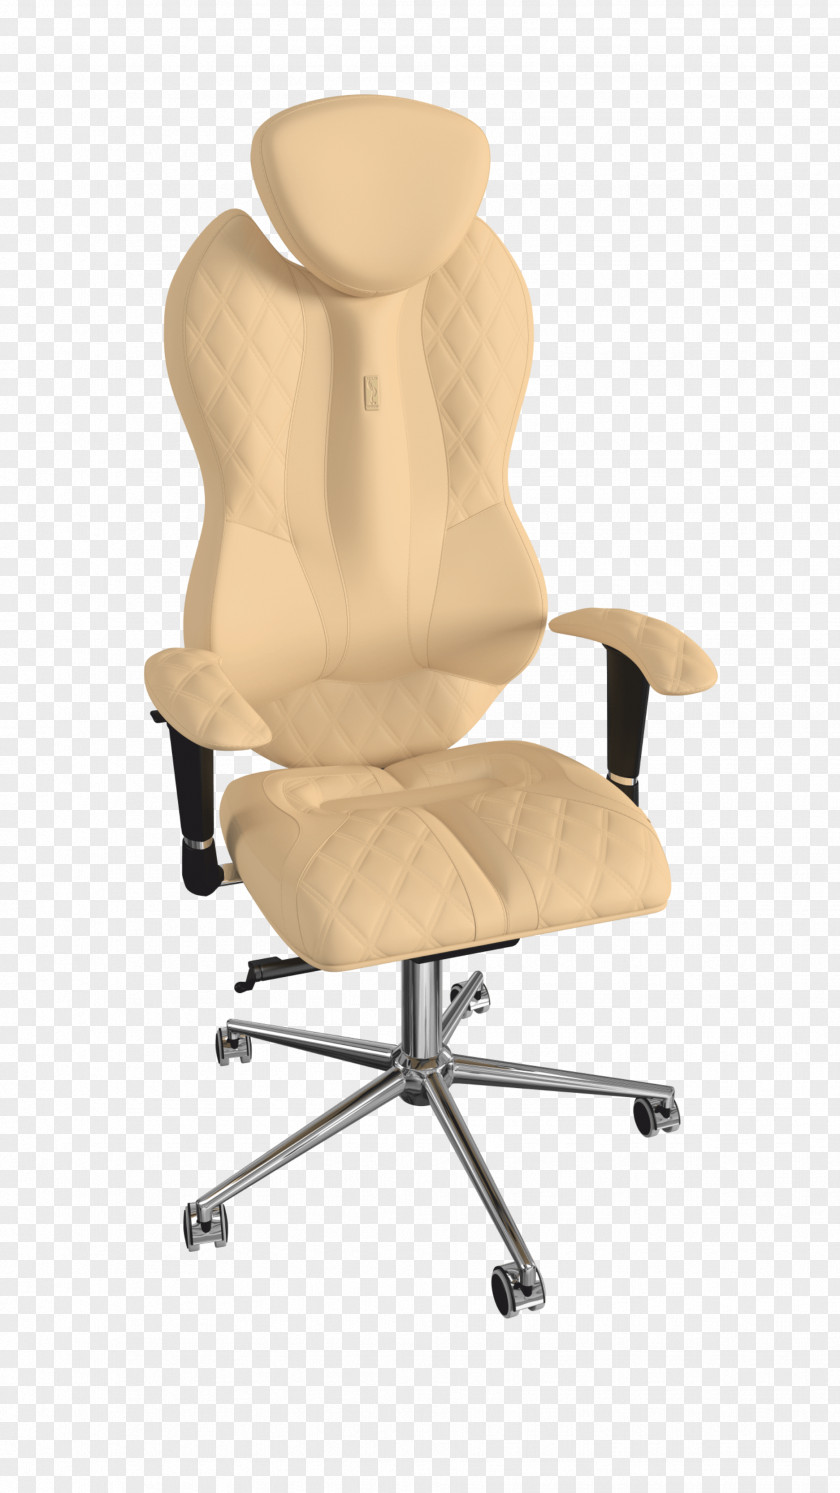 Office Chair Wing Human Factors And Ergonomics Furniture Armrest PNG